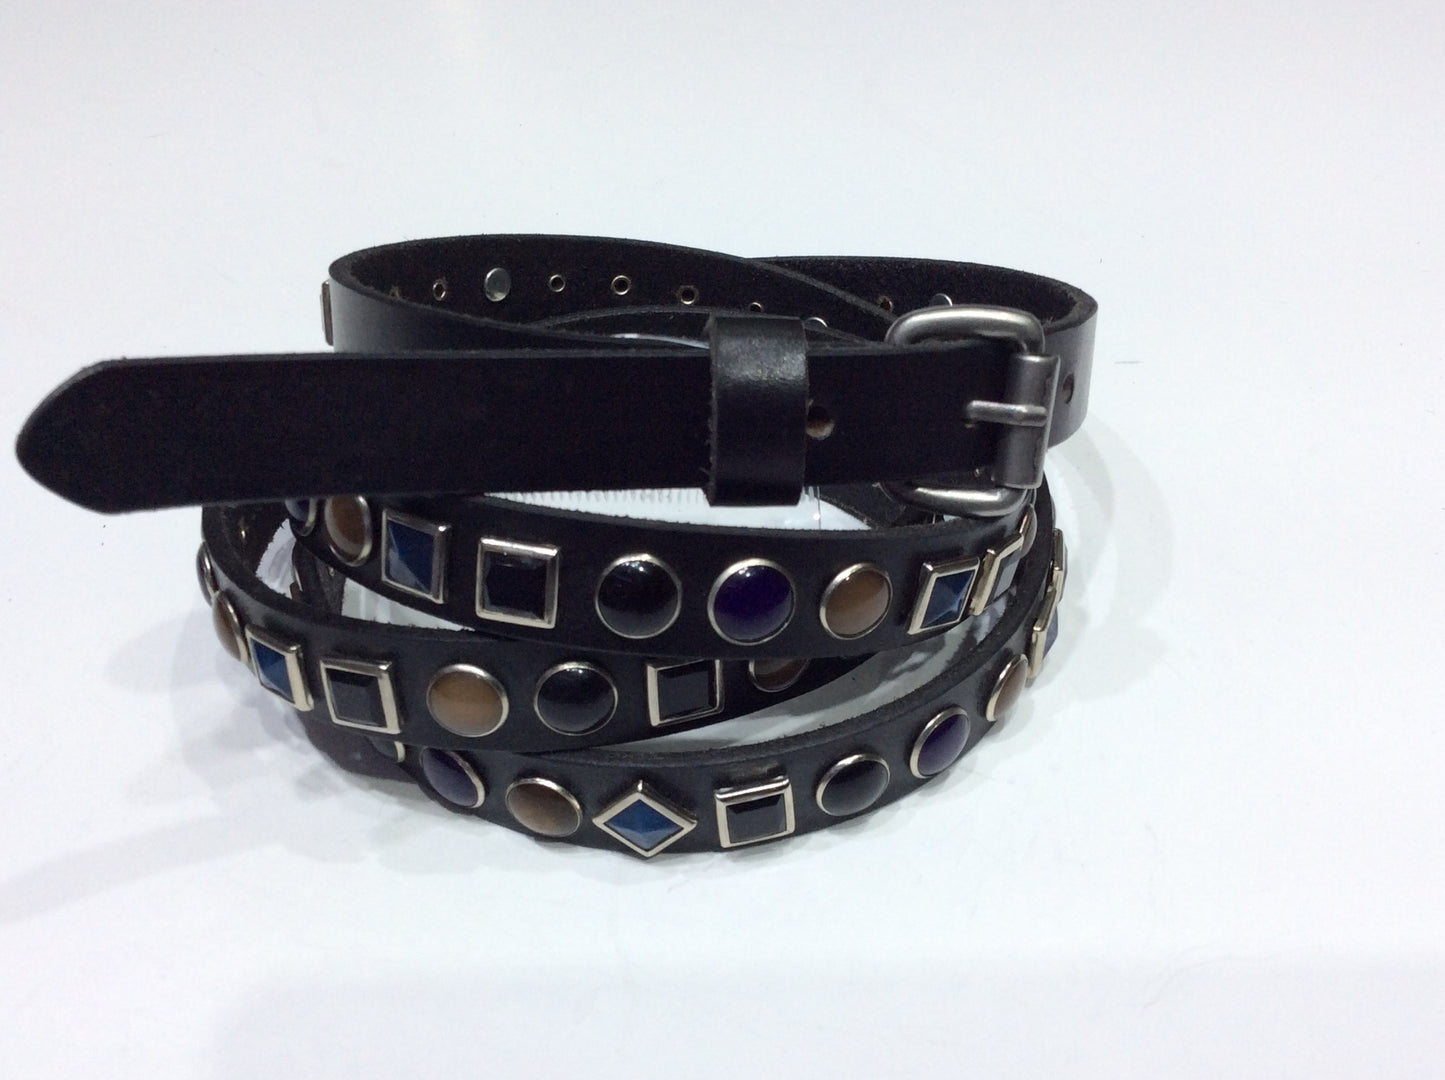 Belts-Narrow Width Double Wrap Leather Embellished with Colored Stones in Geometric Shapes